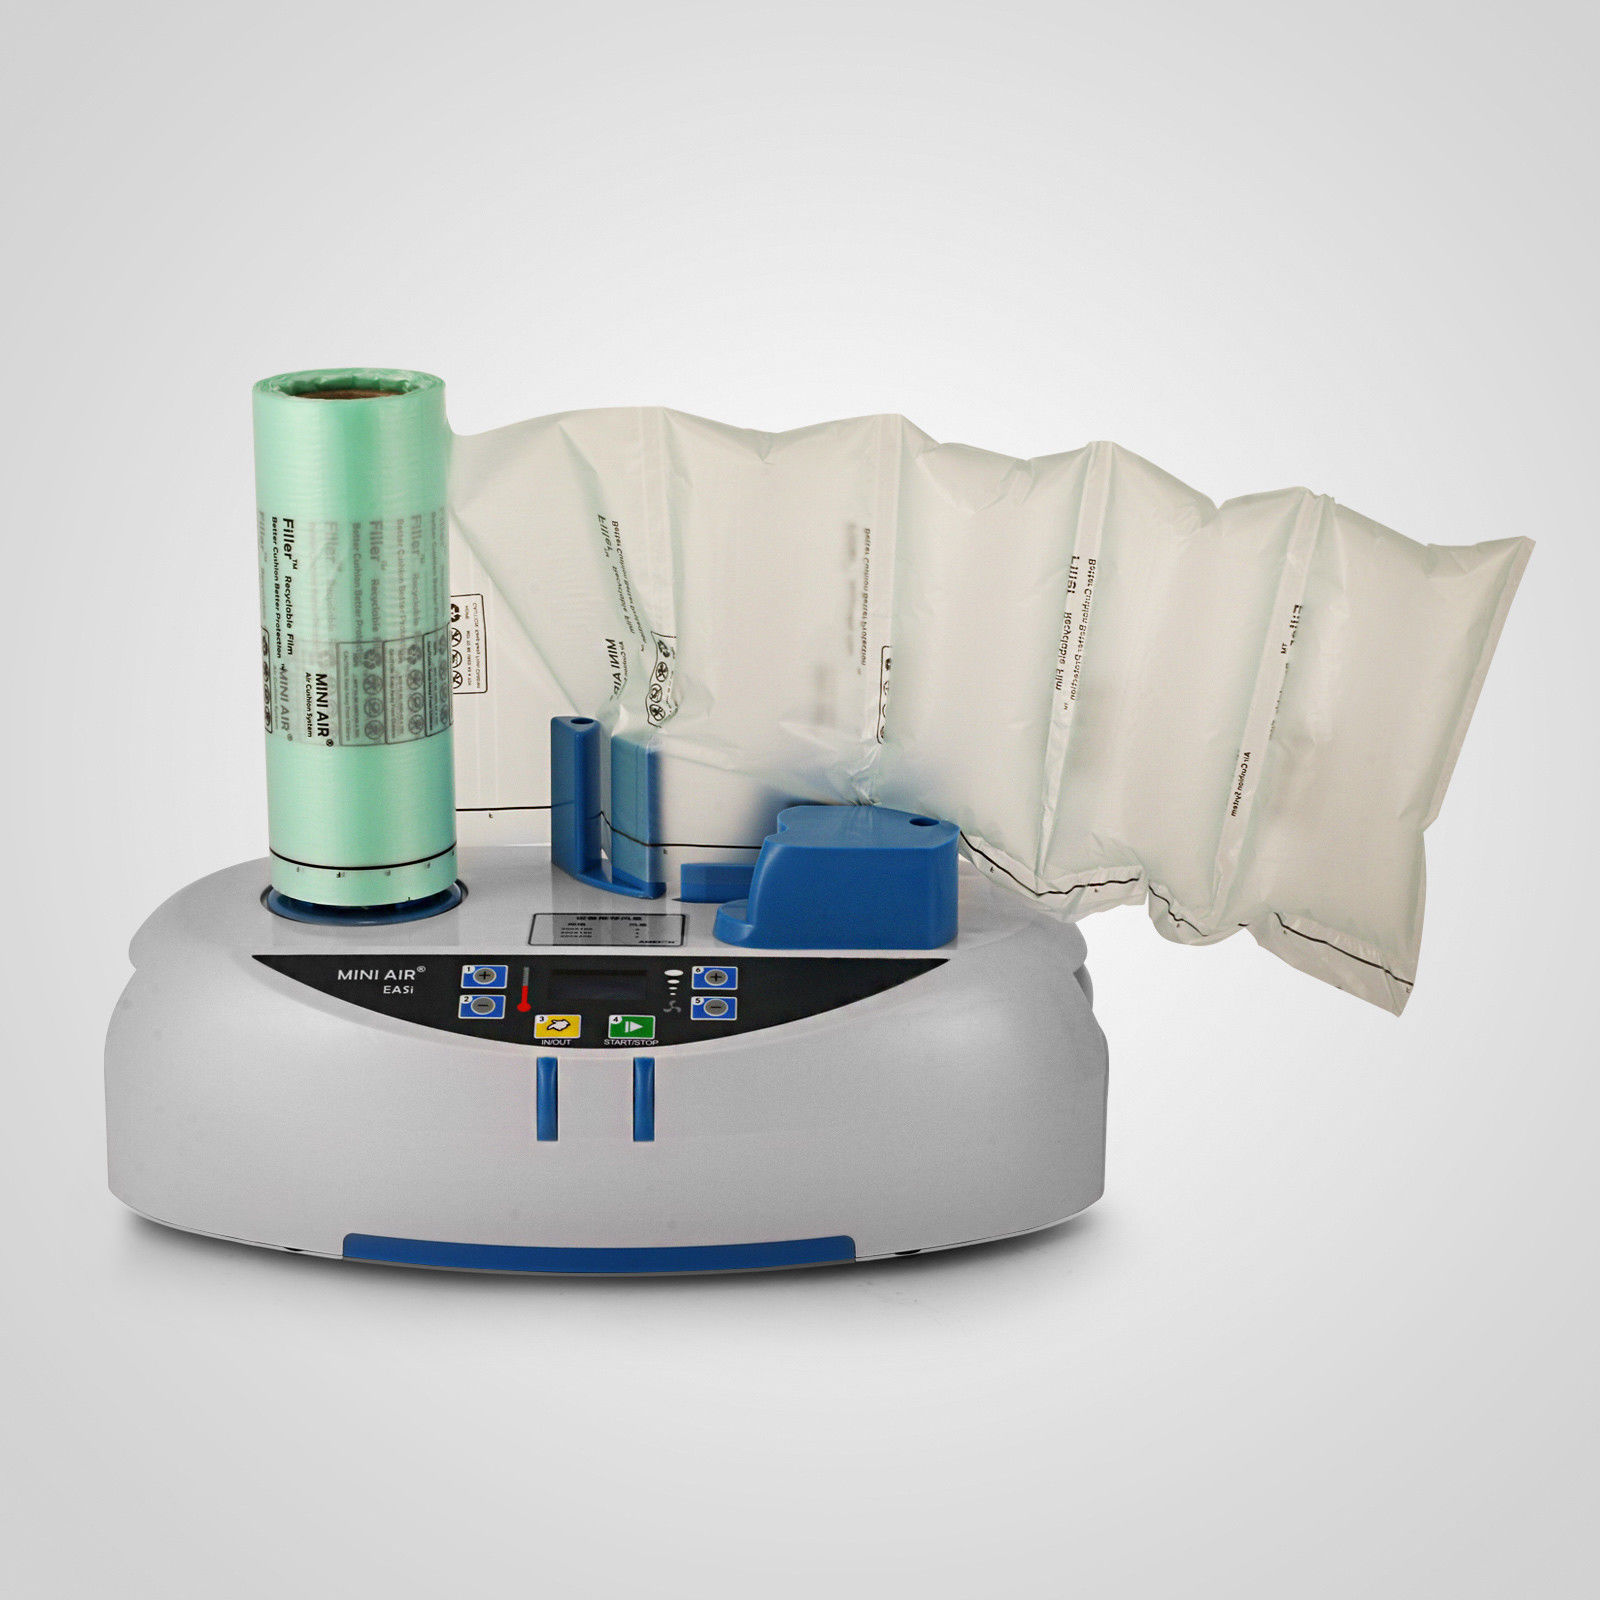 MINI AIR EASI Air Pillow Maker,Cushion Packaging Machine,Only 2.5kgs, Though sma Other